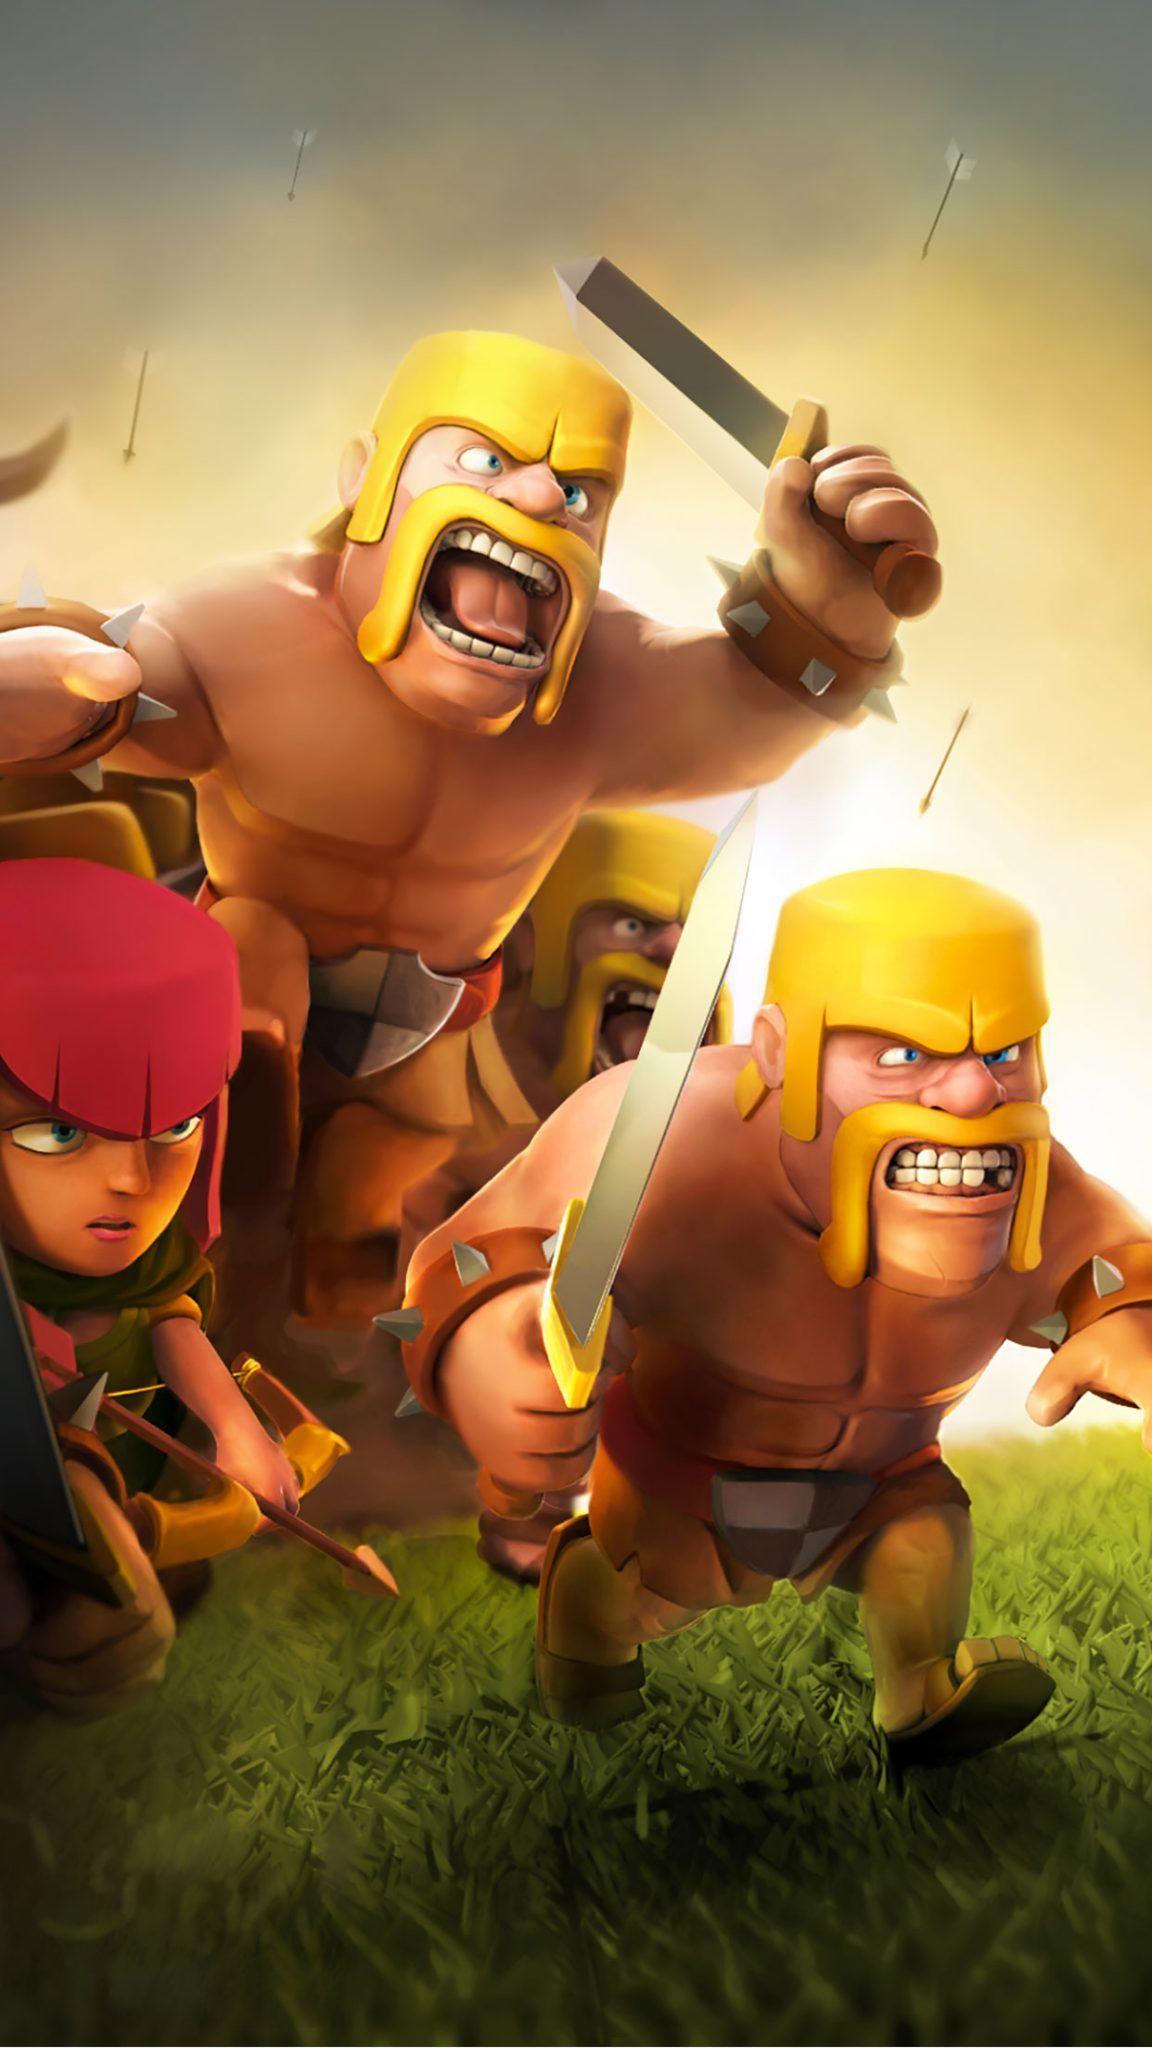 Clash Of Clans Wallpaper iPhone. CLash of Clans Mobile